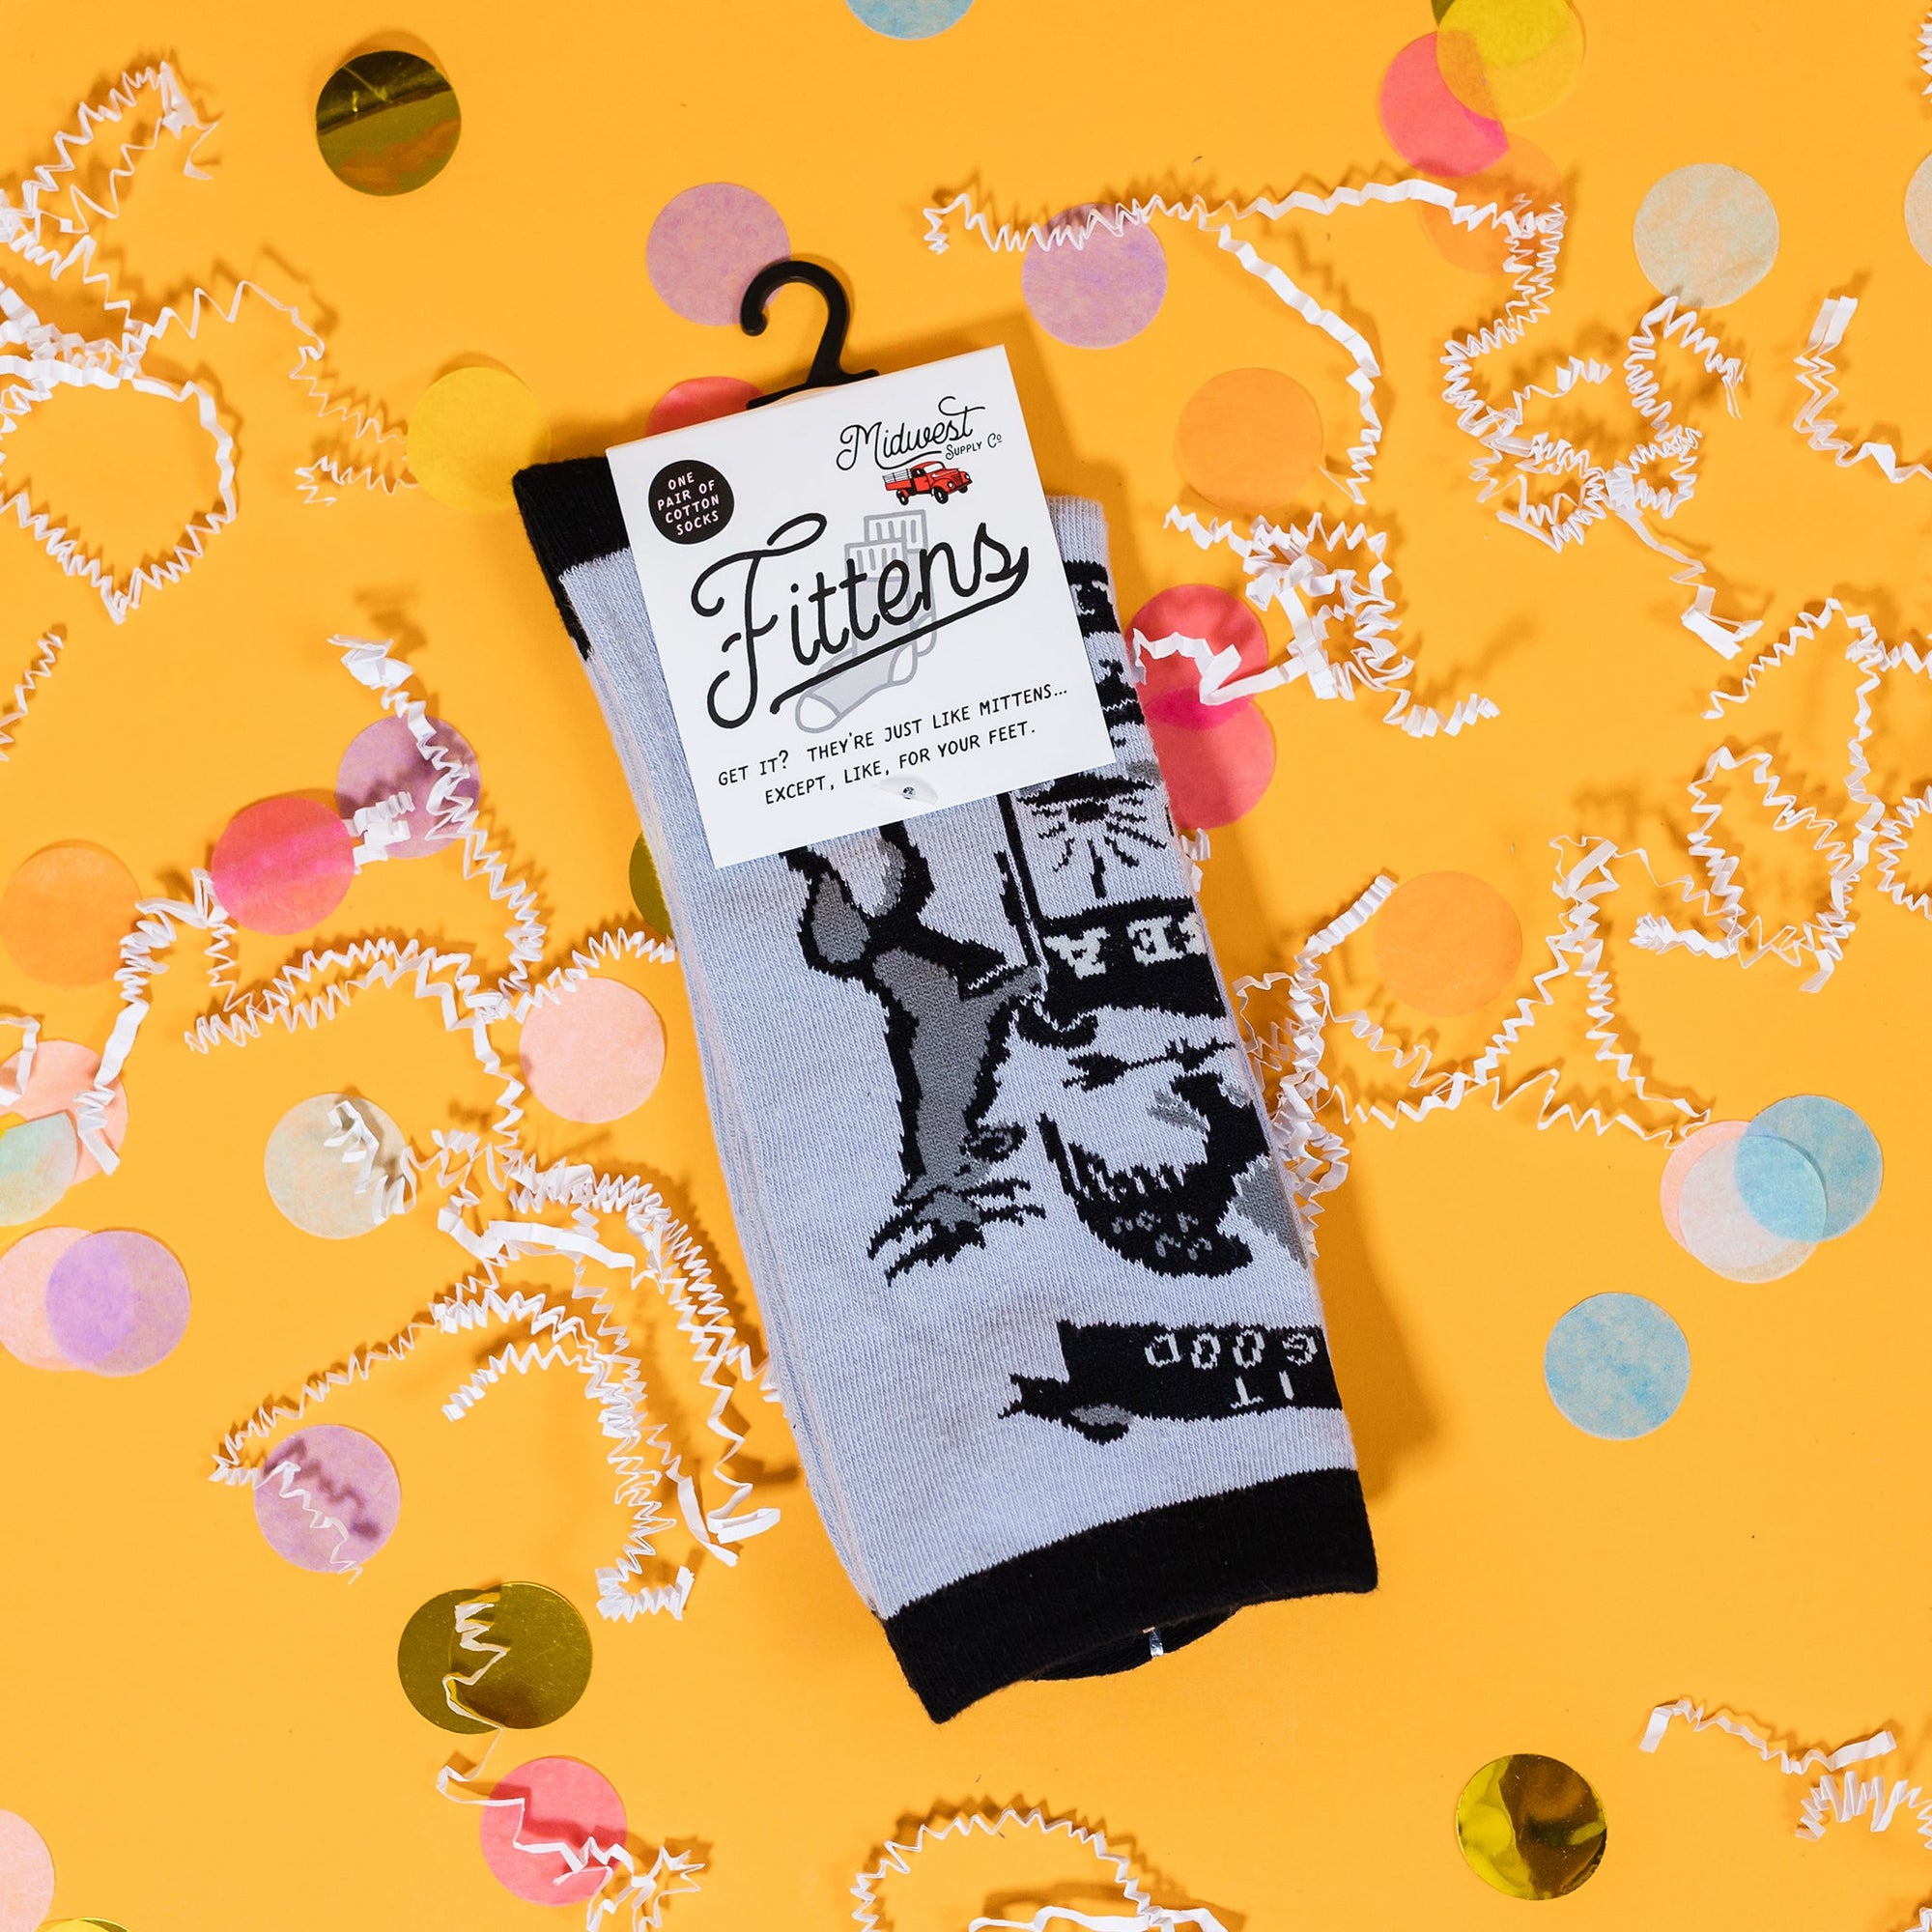 On a sunny mustard background sits a pair of socks with white crinkle and big, colorful confetti scattered around. The socks design features hand lettering and custom illustrations for a modern, lighthearted take on the flag of Michigan. It is black on grey.